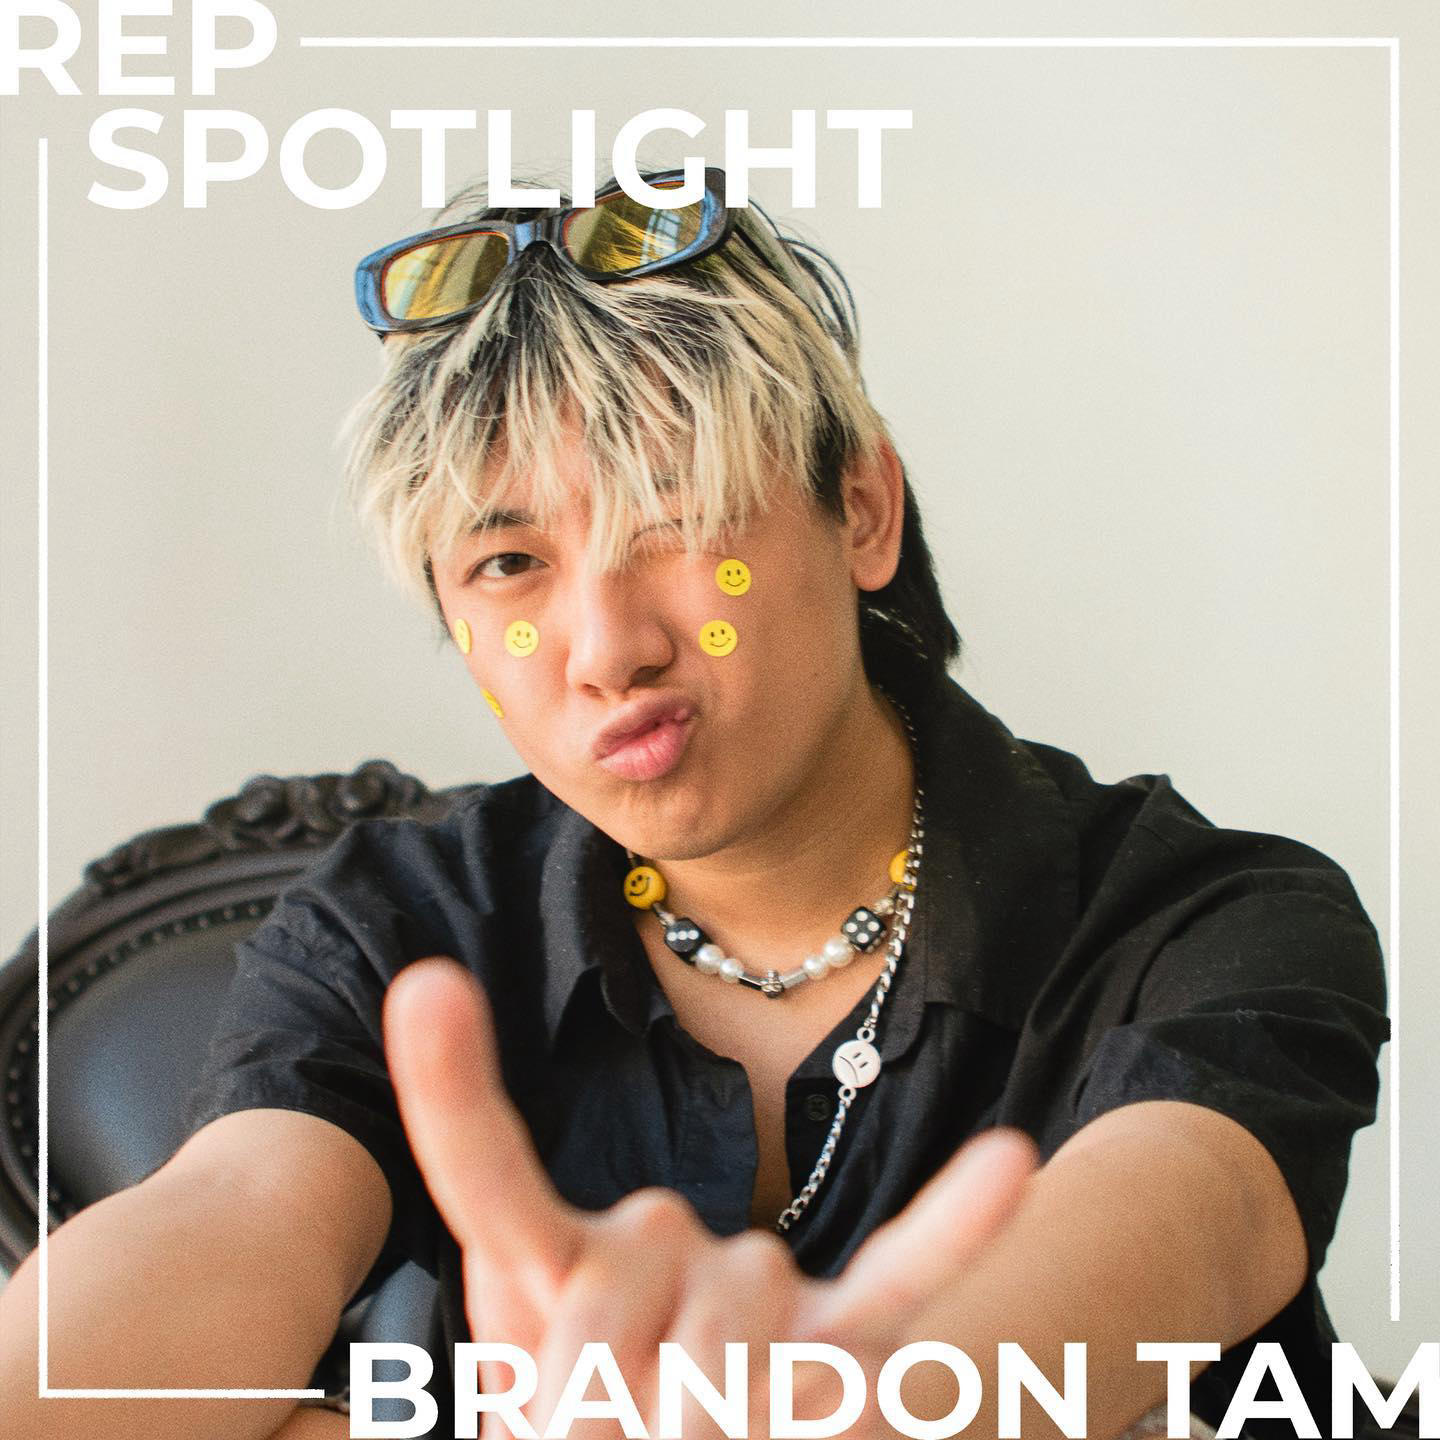 Sony Music U - Back with another #repspotlight this week featuring one of our Los Angeles reps #bran